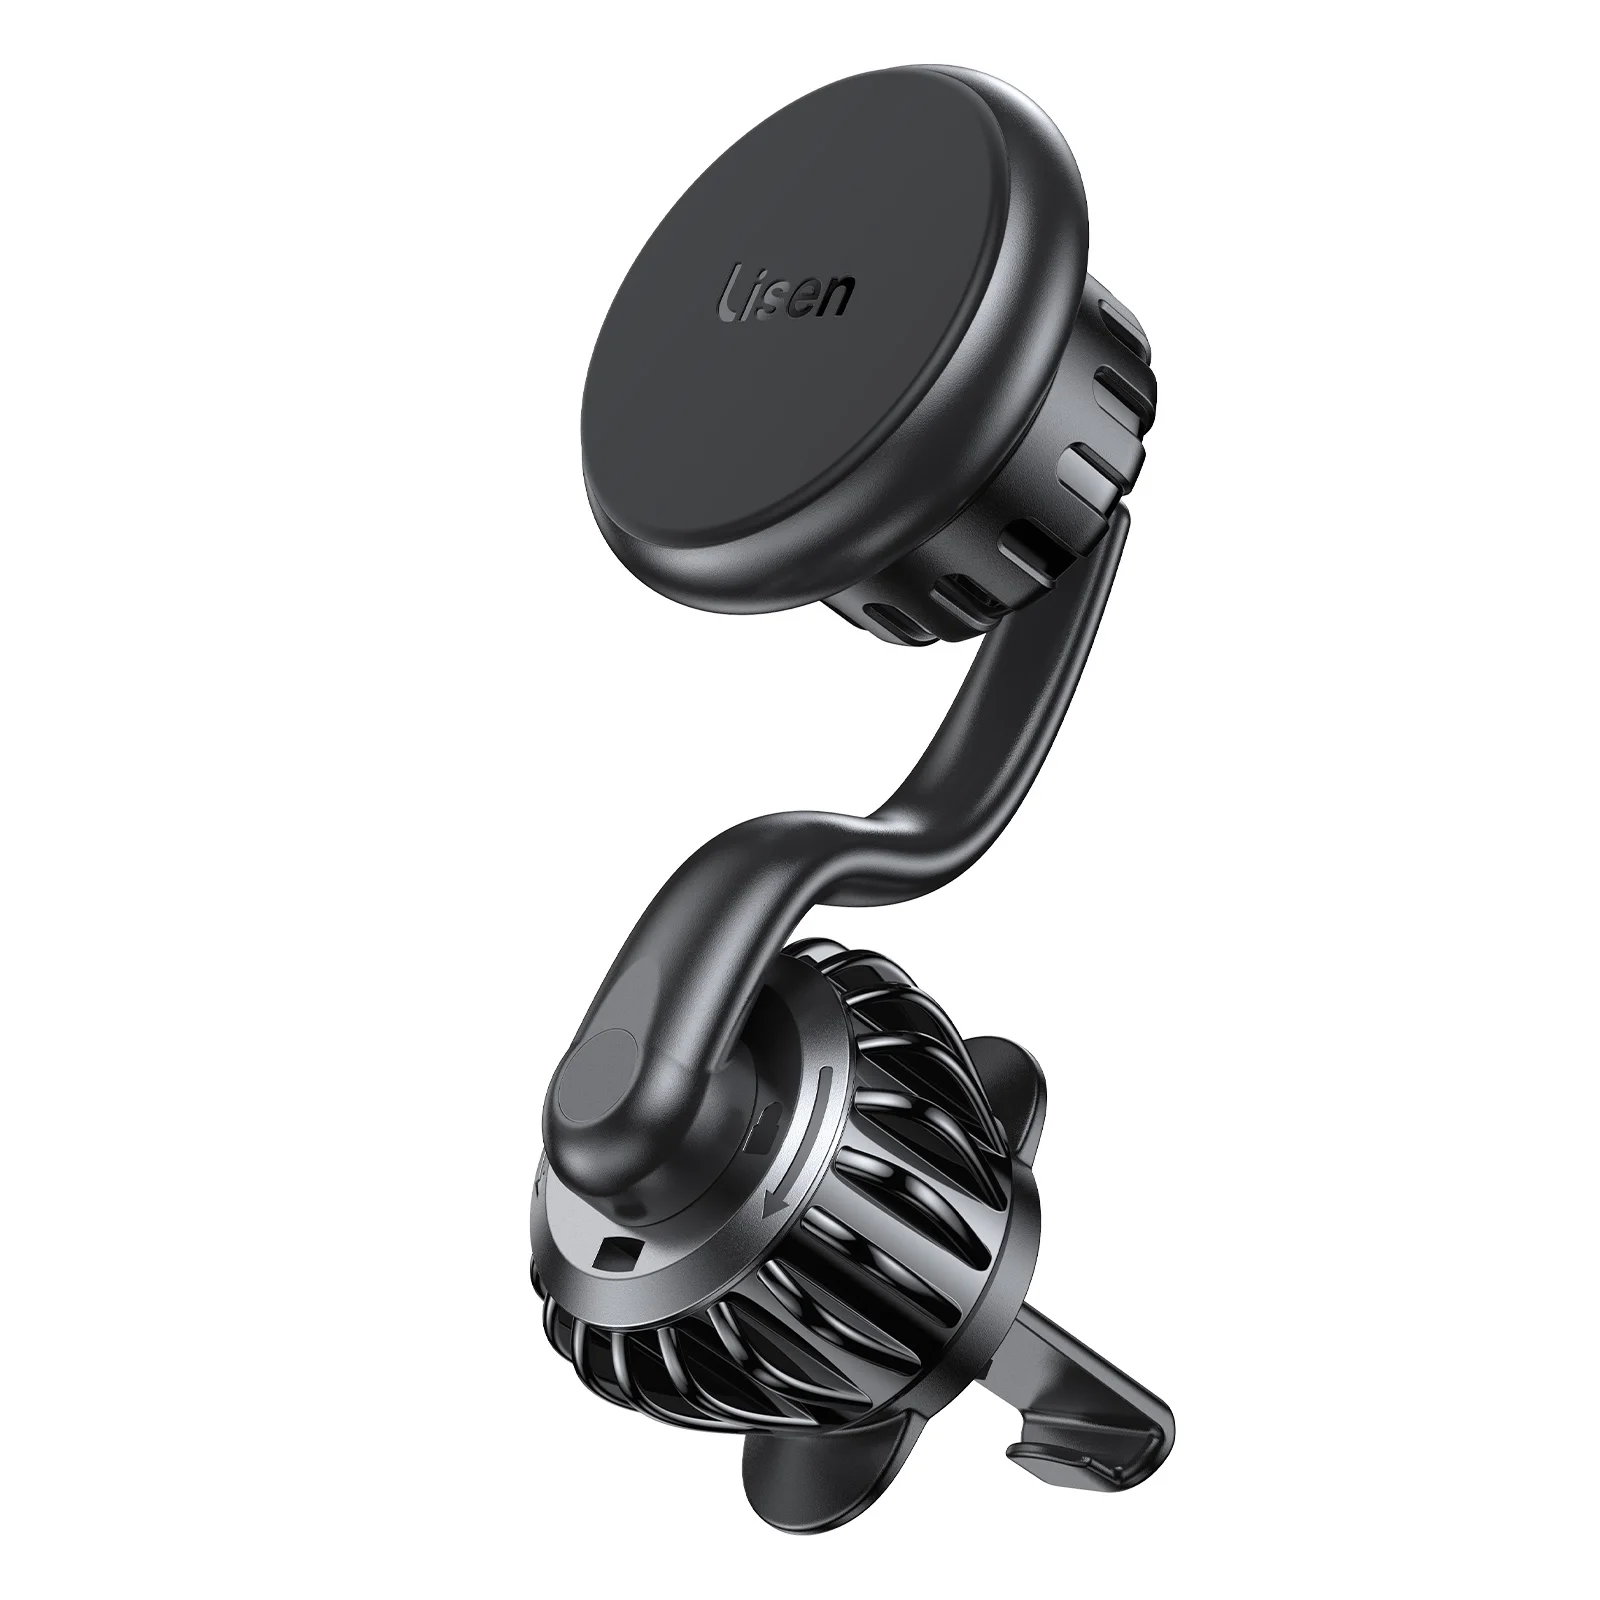 LISEN Magnetic Phone Car Mount Lisen Vent Phone Holder, [Upgraded Clip]  Stable Phone Car Holder Mount [360° Rotate Arm] Unobstructed Car Vent Phone